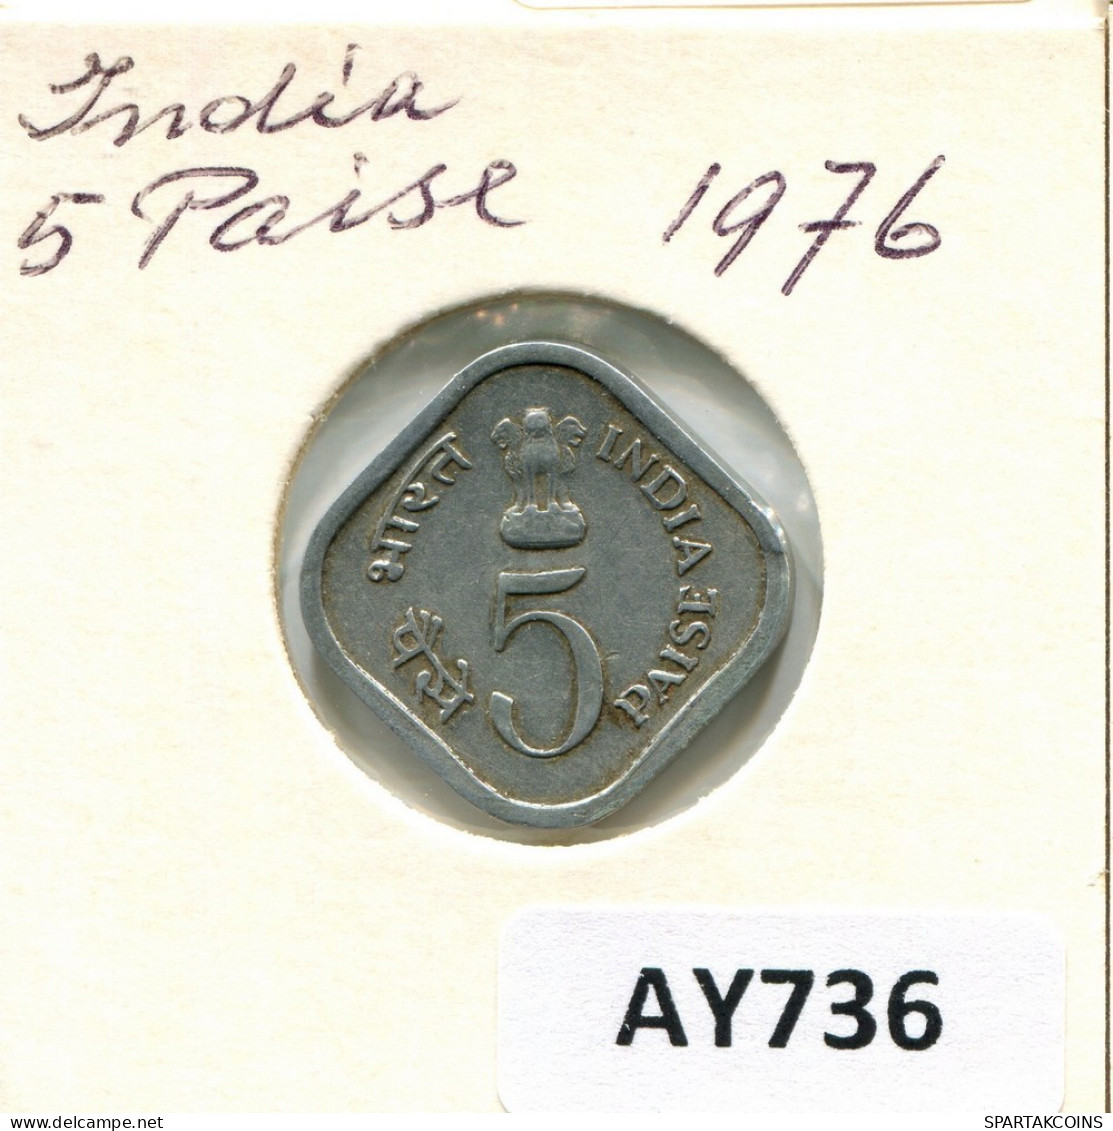 5 PAISE 1976 INDE INDIA Pièce #AY736.F.A - Indien